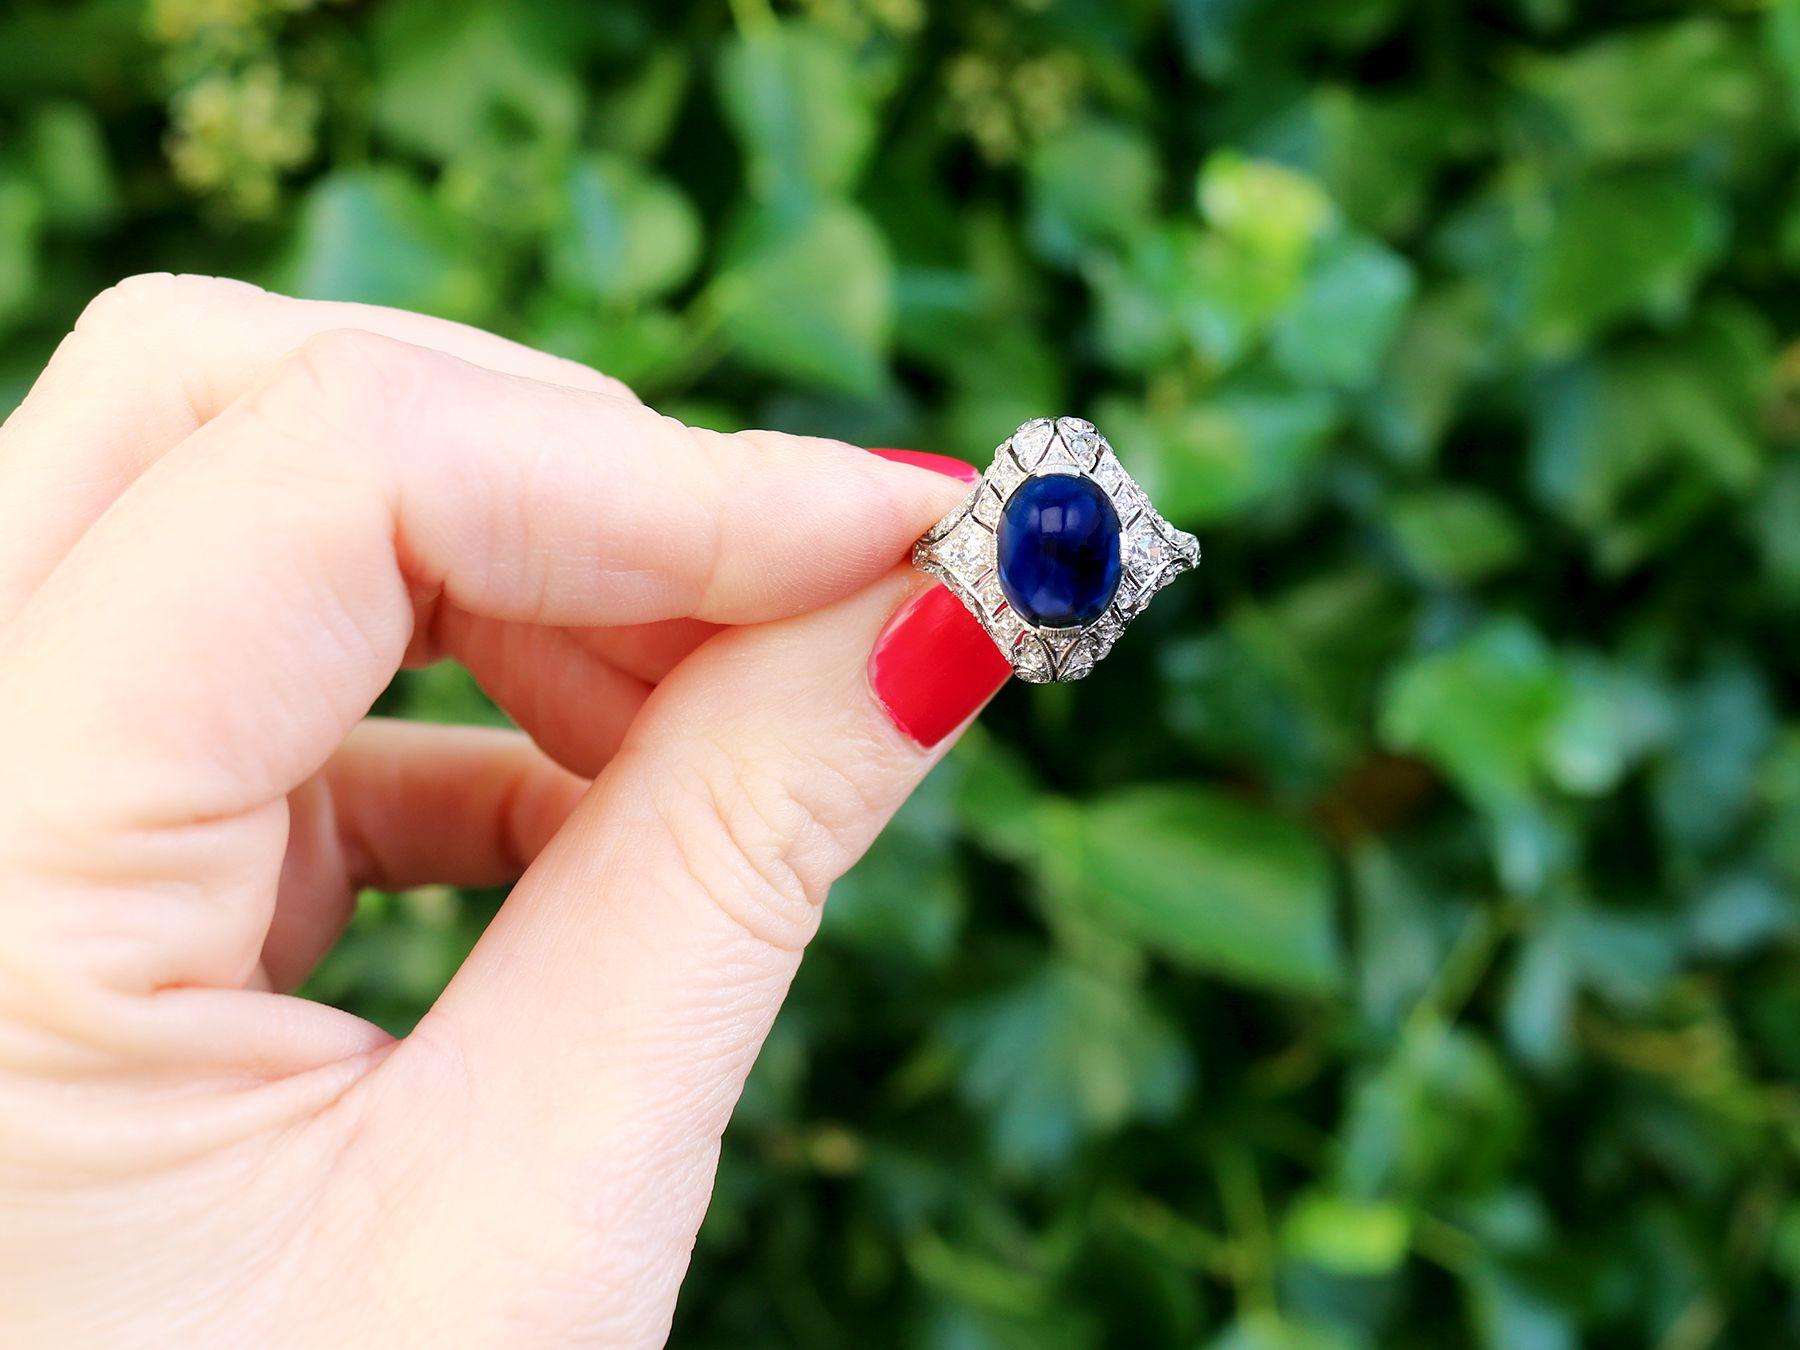 A stunning Art Deco antique 5.21 carat Basaltic sapphire and 0.45 carat diamond, platinum dress ring; part of our diverse antique jewelry and estate jewelry collections.

This stunning, fine and impressive Art Deco cabochon cut sapphire ring has